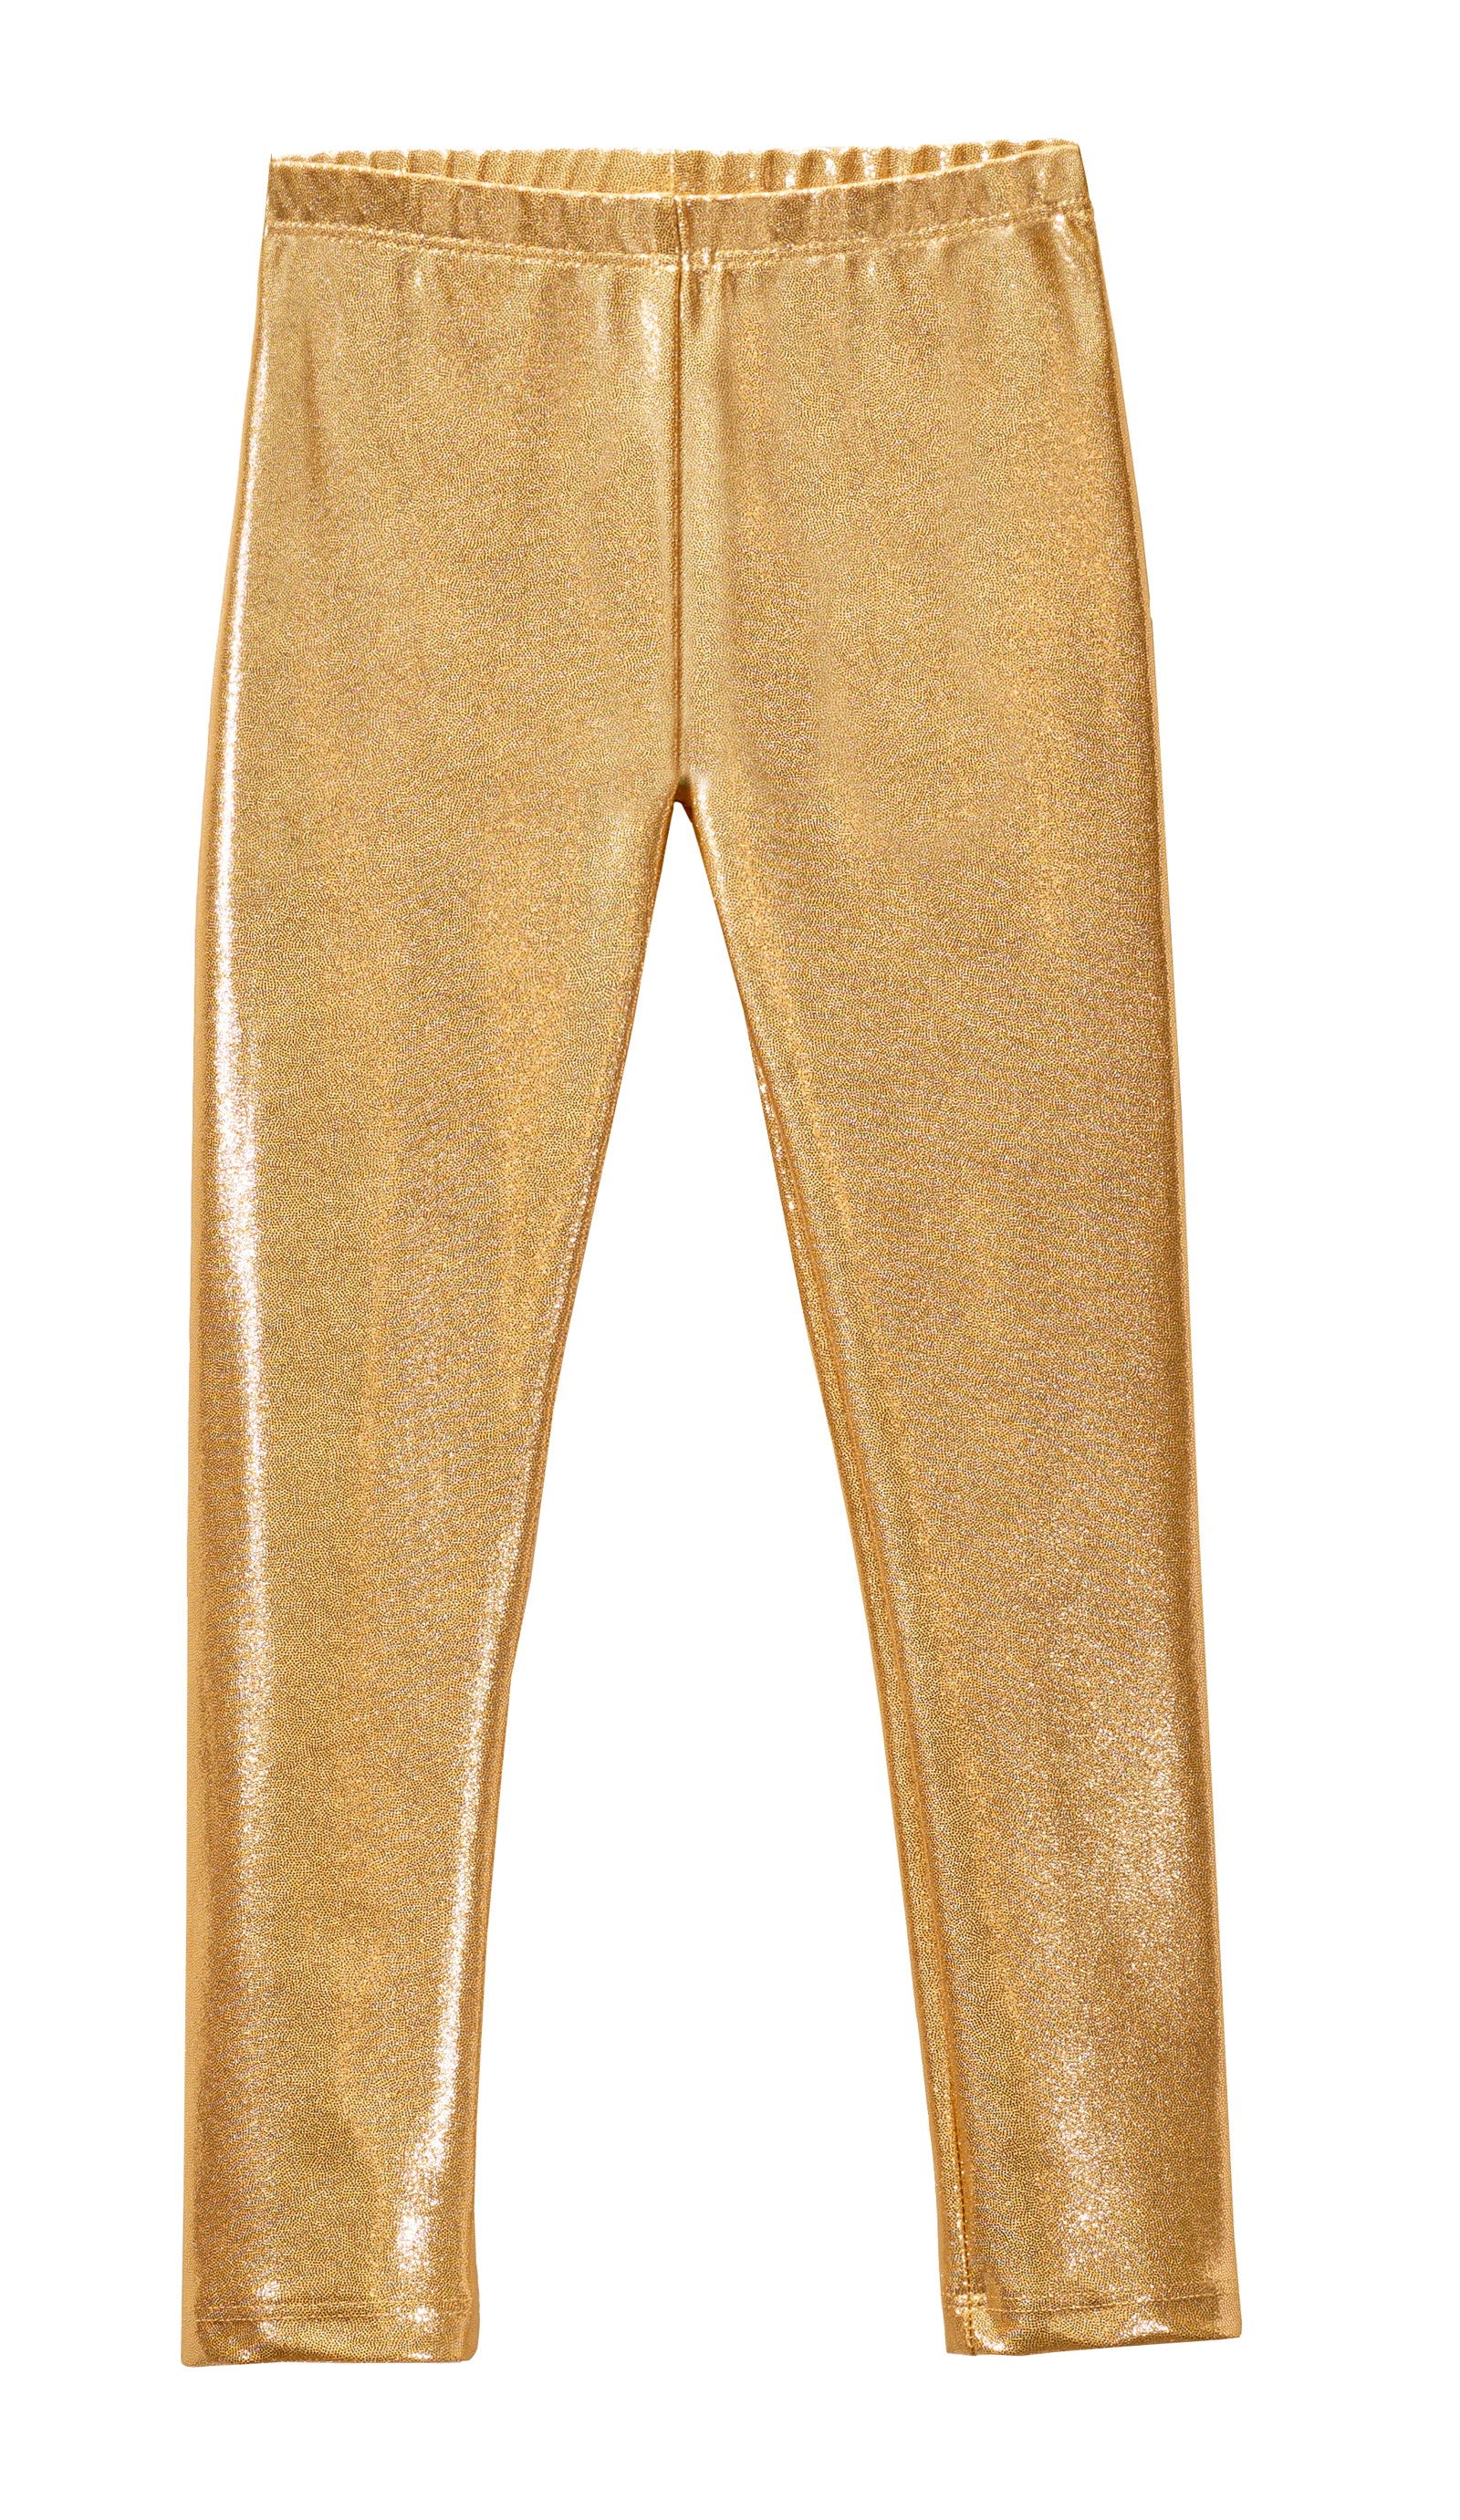 Shimmer Tights - Gold - Buckets and Spades